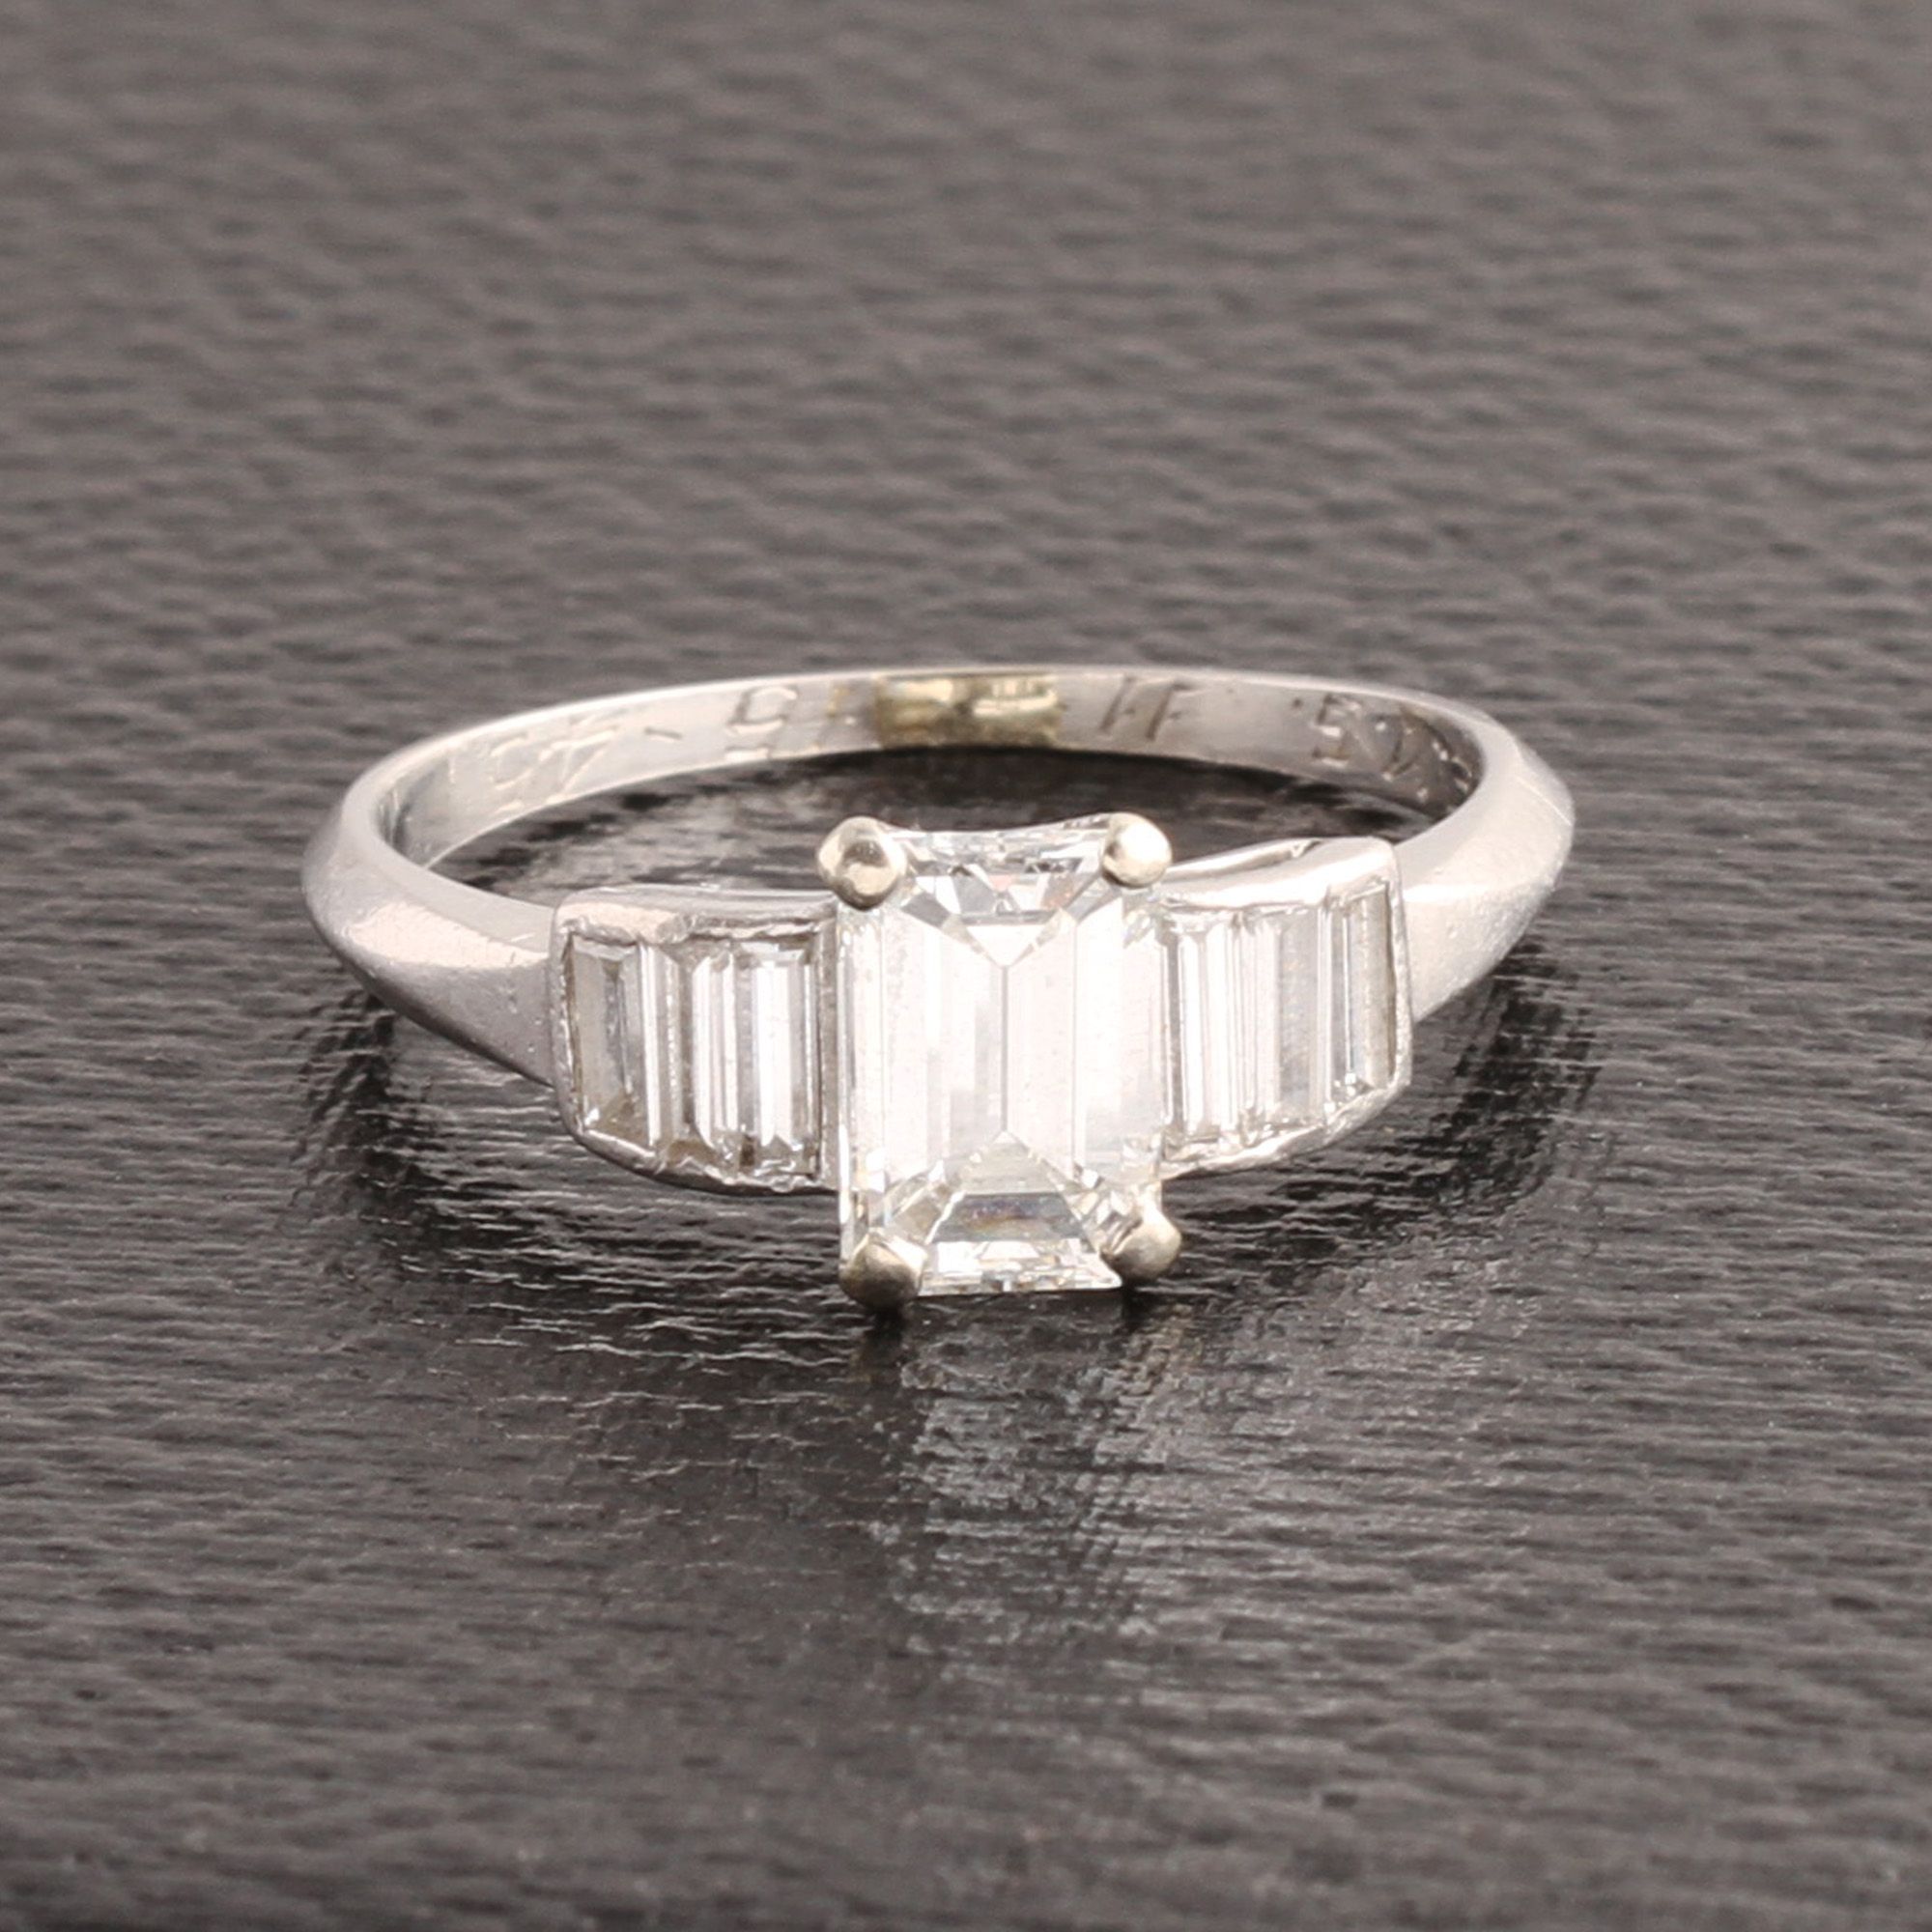 1940s 1ct Emerald Cut Engagement Ring with Baguette Diamond Shoulders